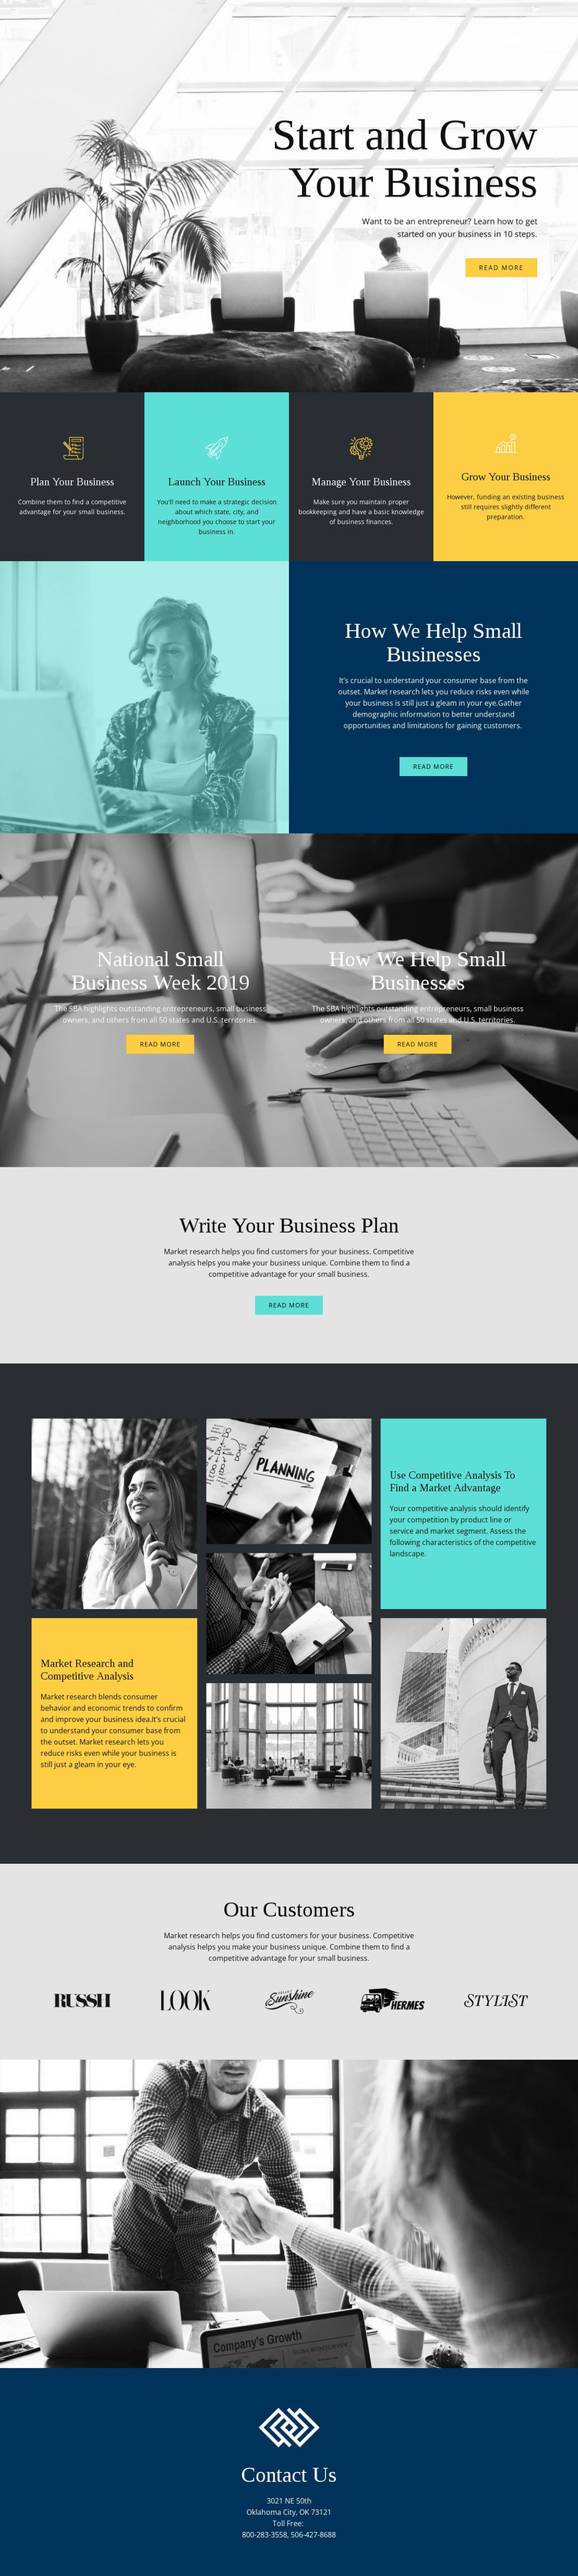 Start and grow your business HTML5 Template